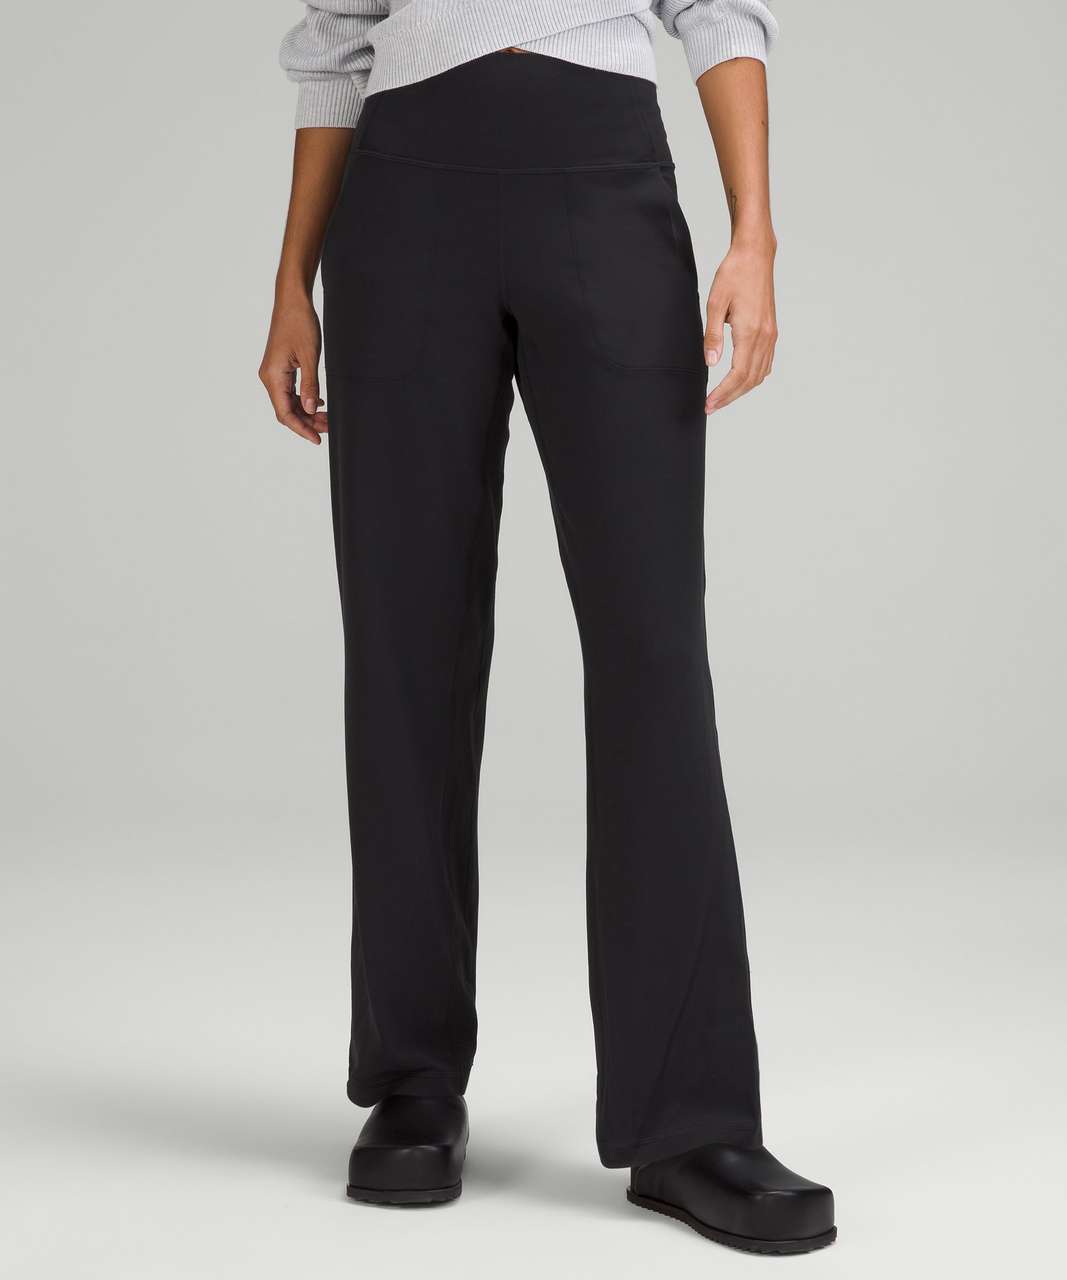 Align high rise wide leg pant, short. I think I'm late to the